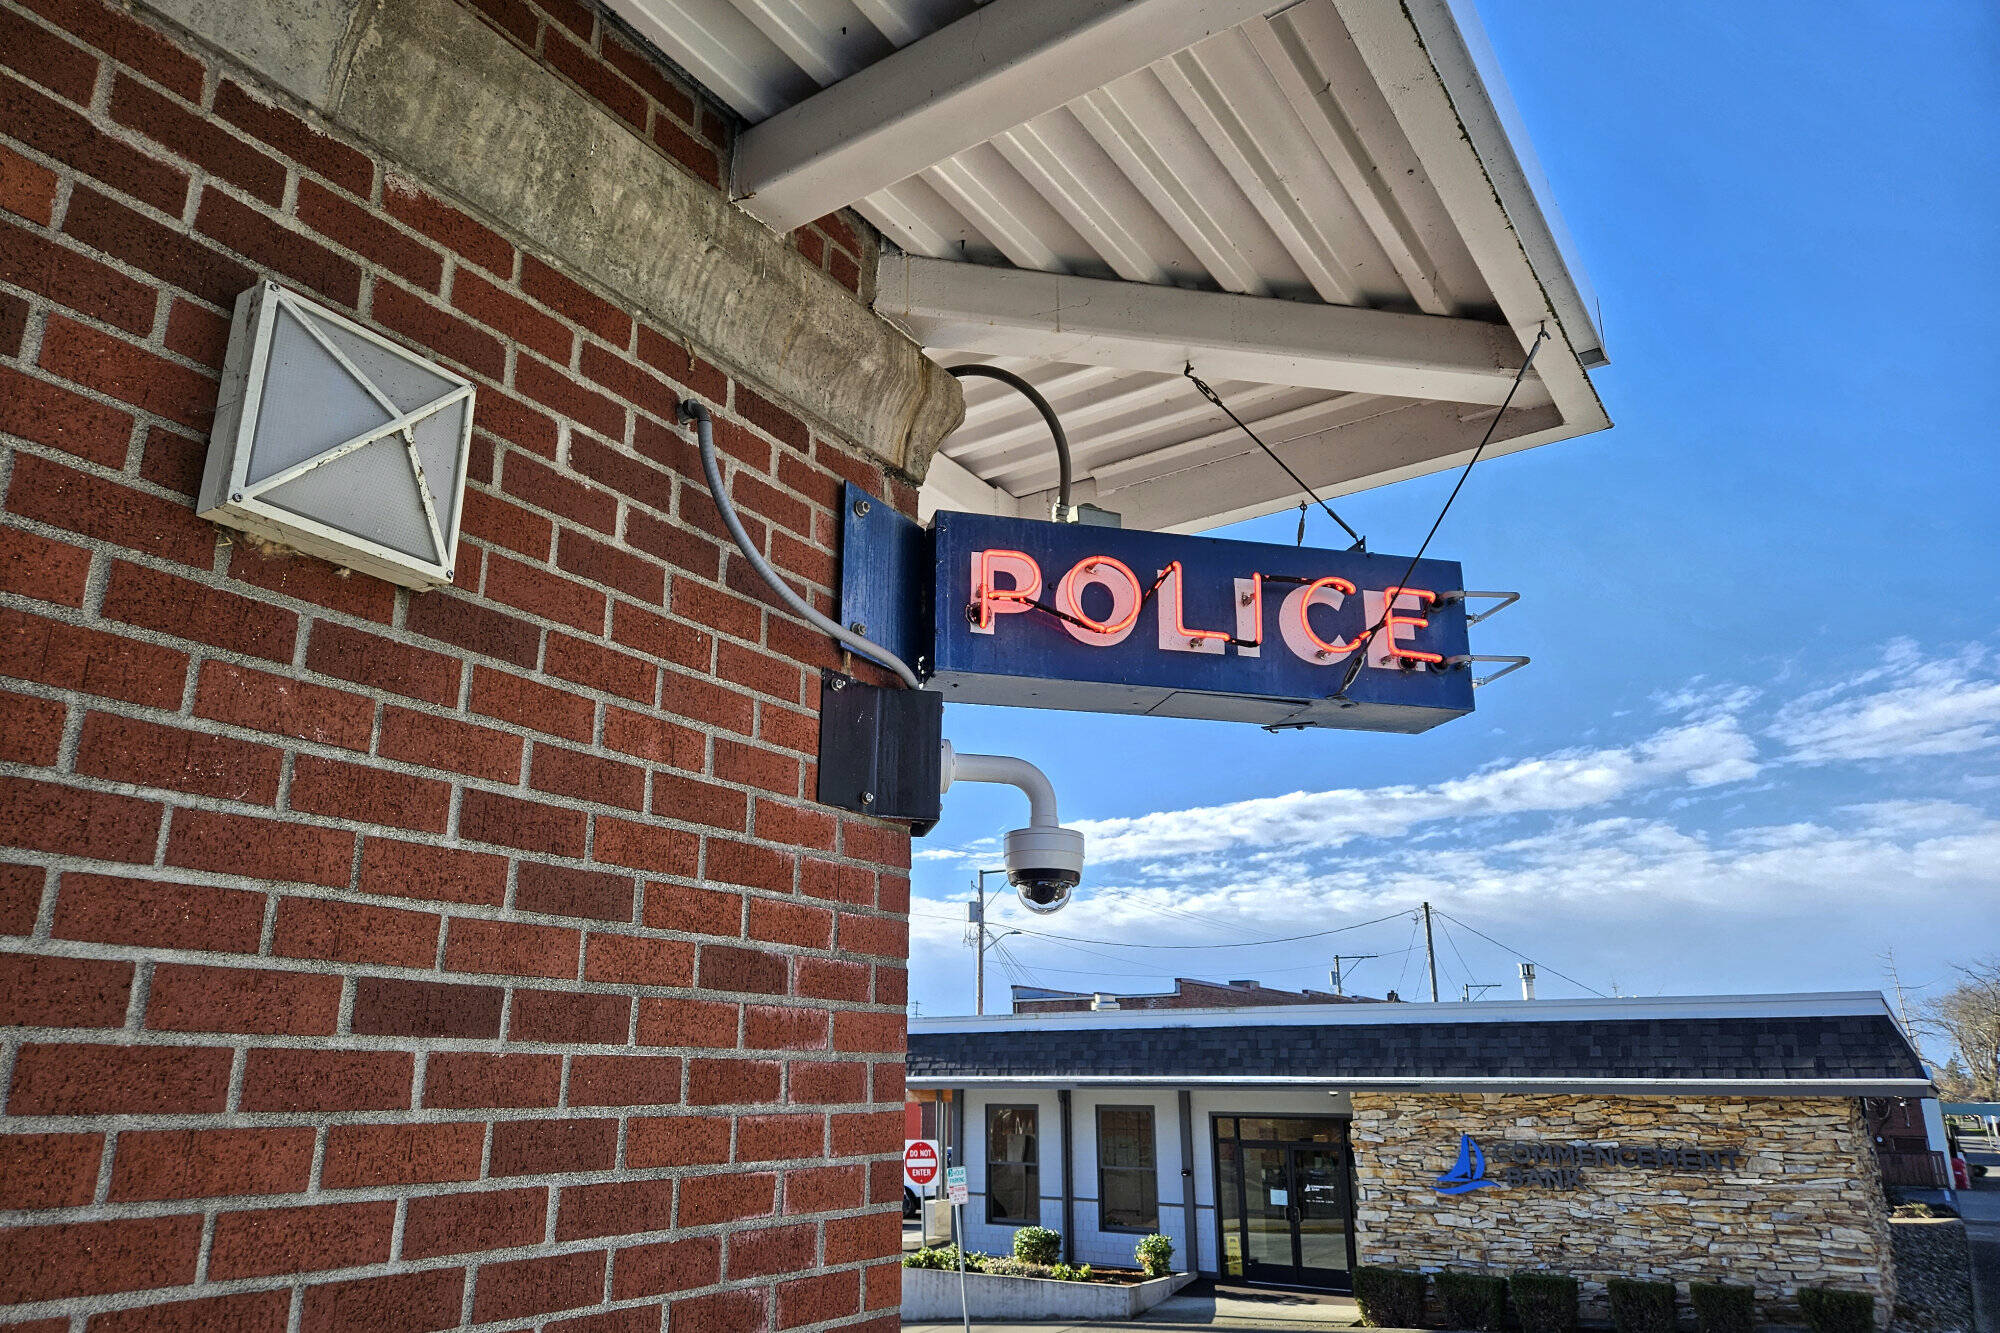 The Enumclaw police station. Photo by Ray Miller-Still